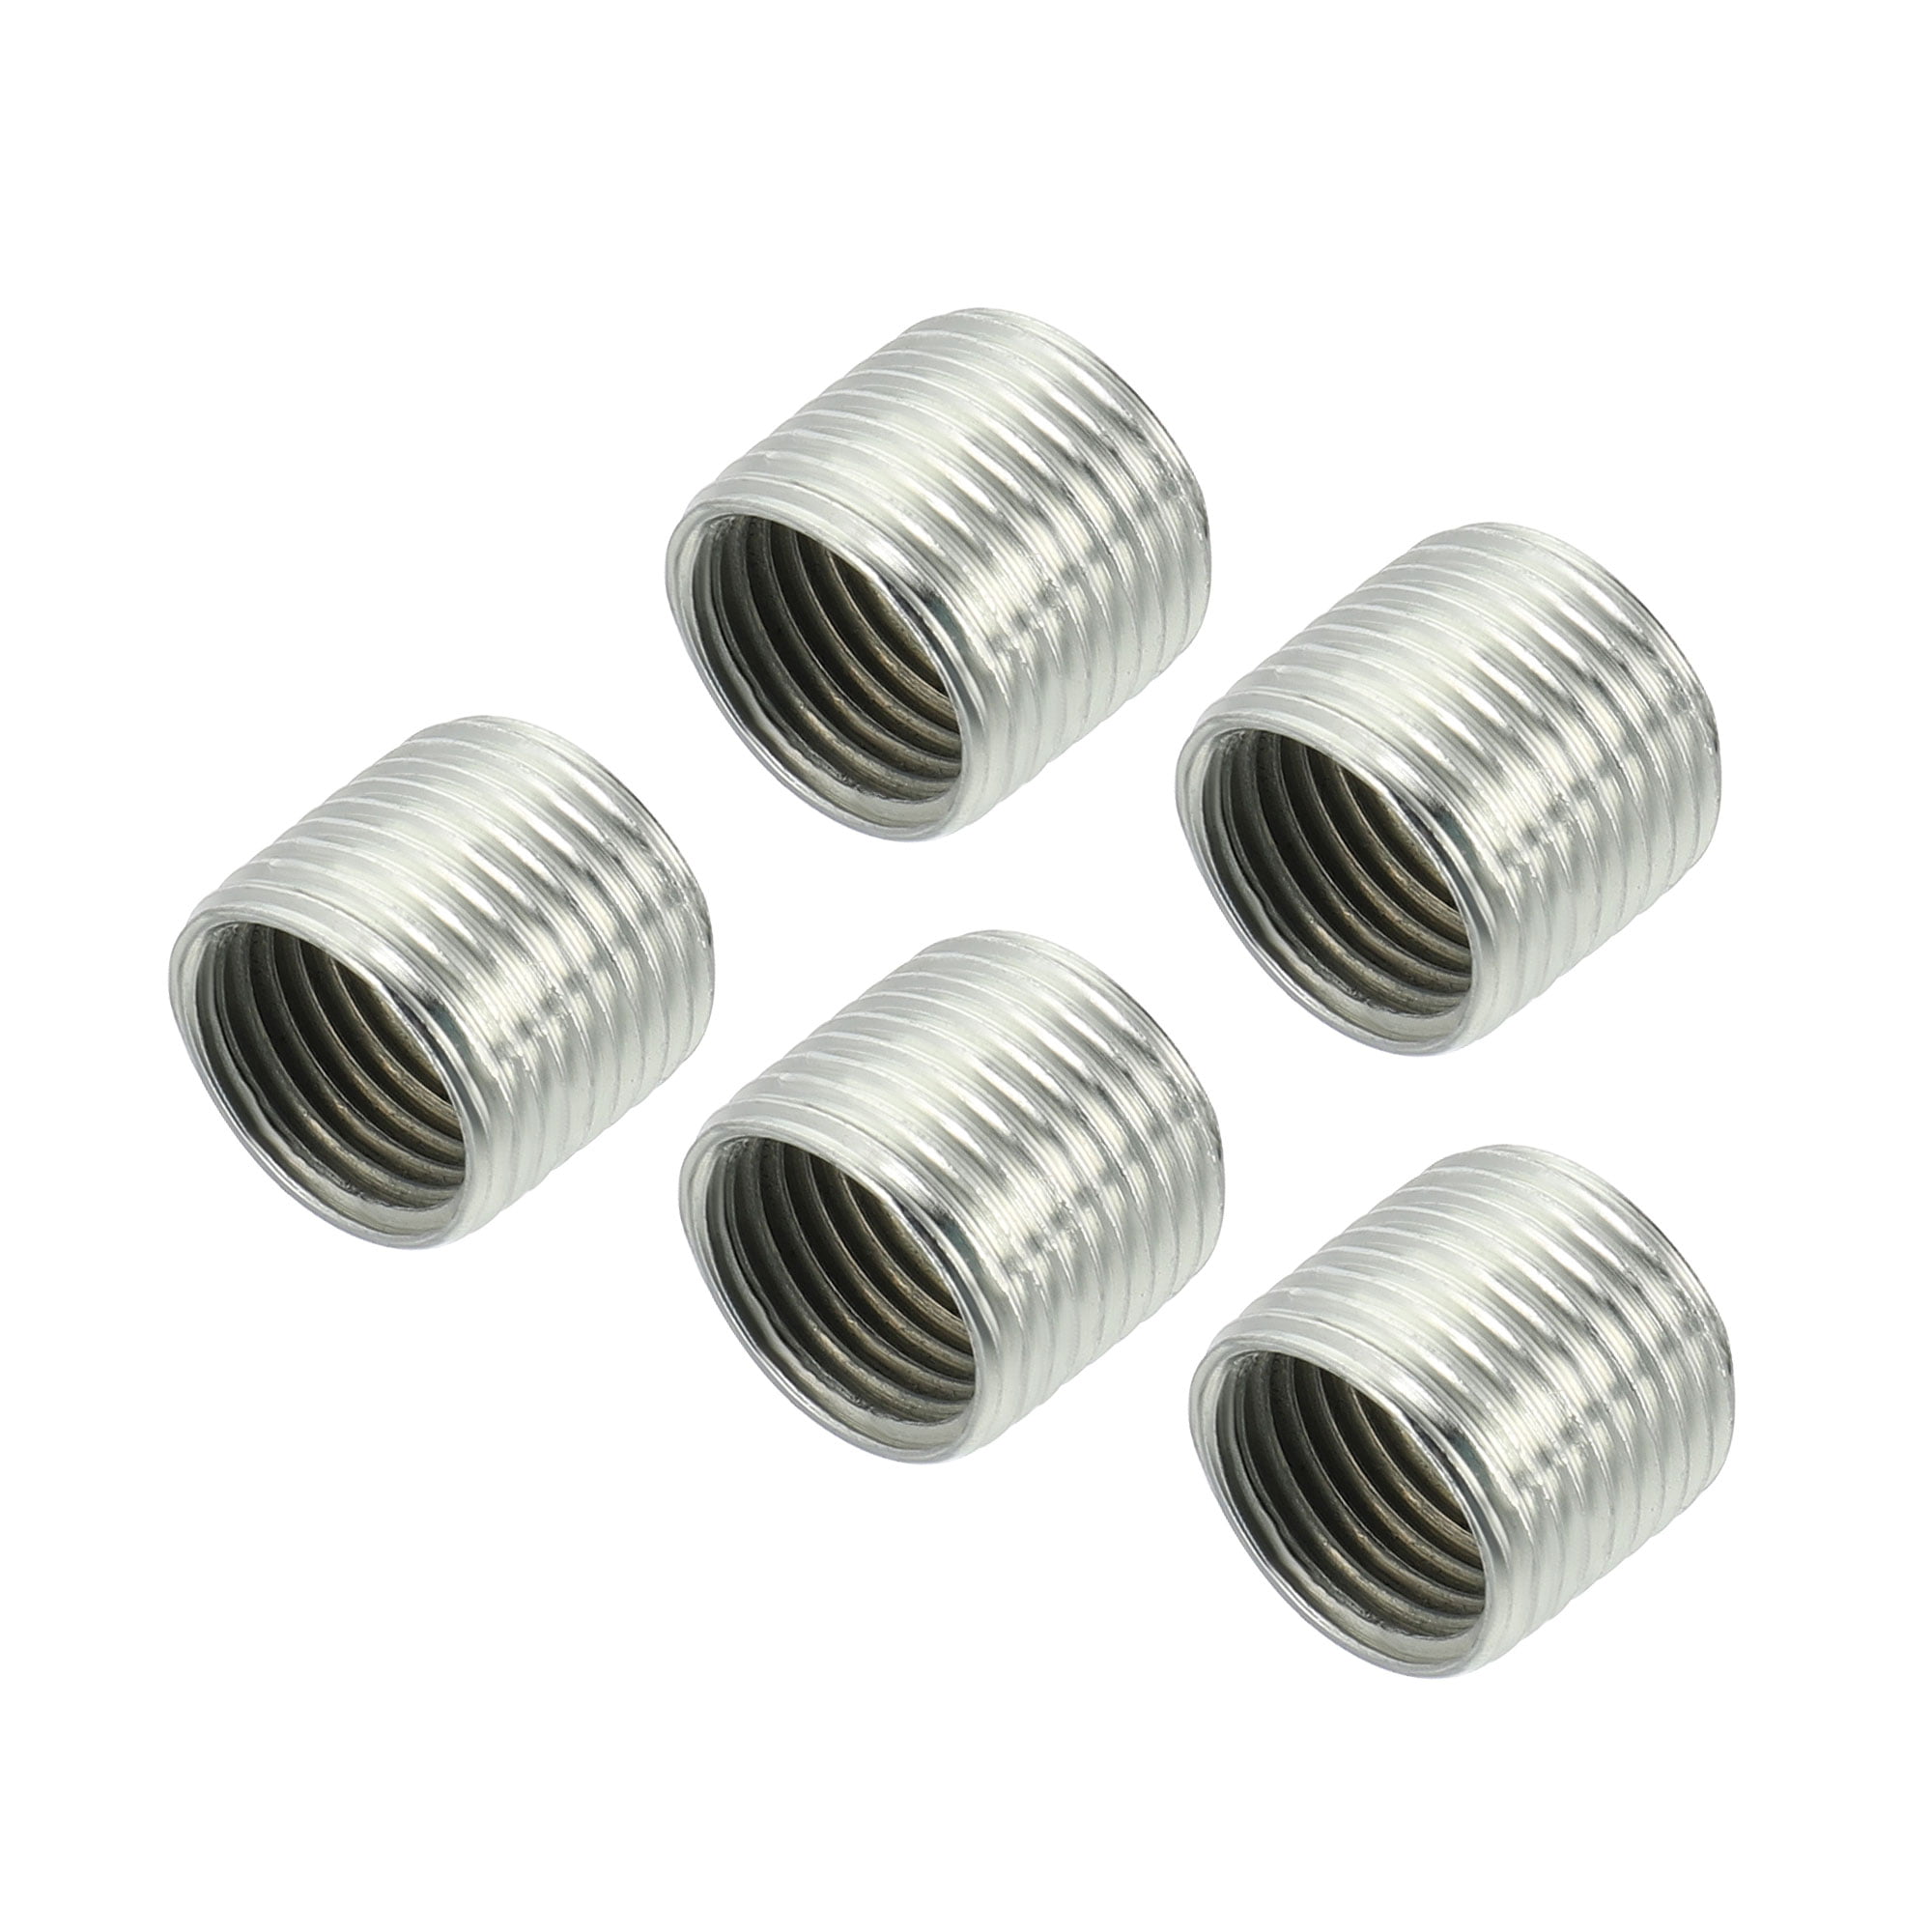 Threaded stud adapter M12/M10, stainless steel A4